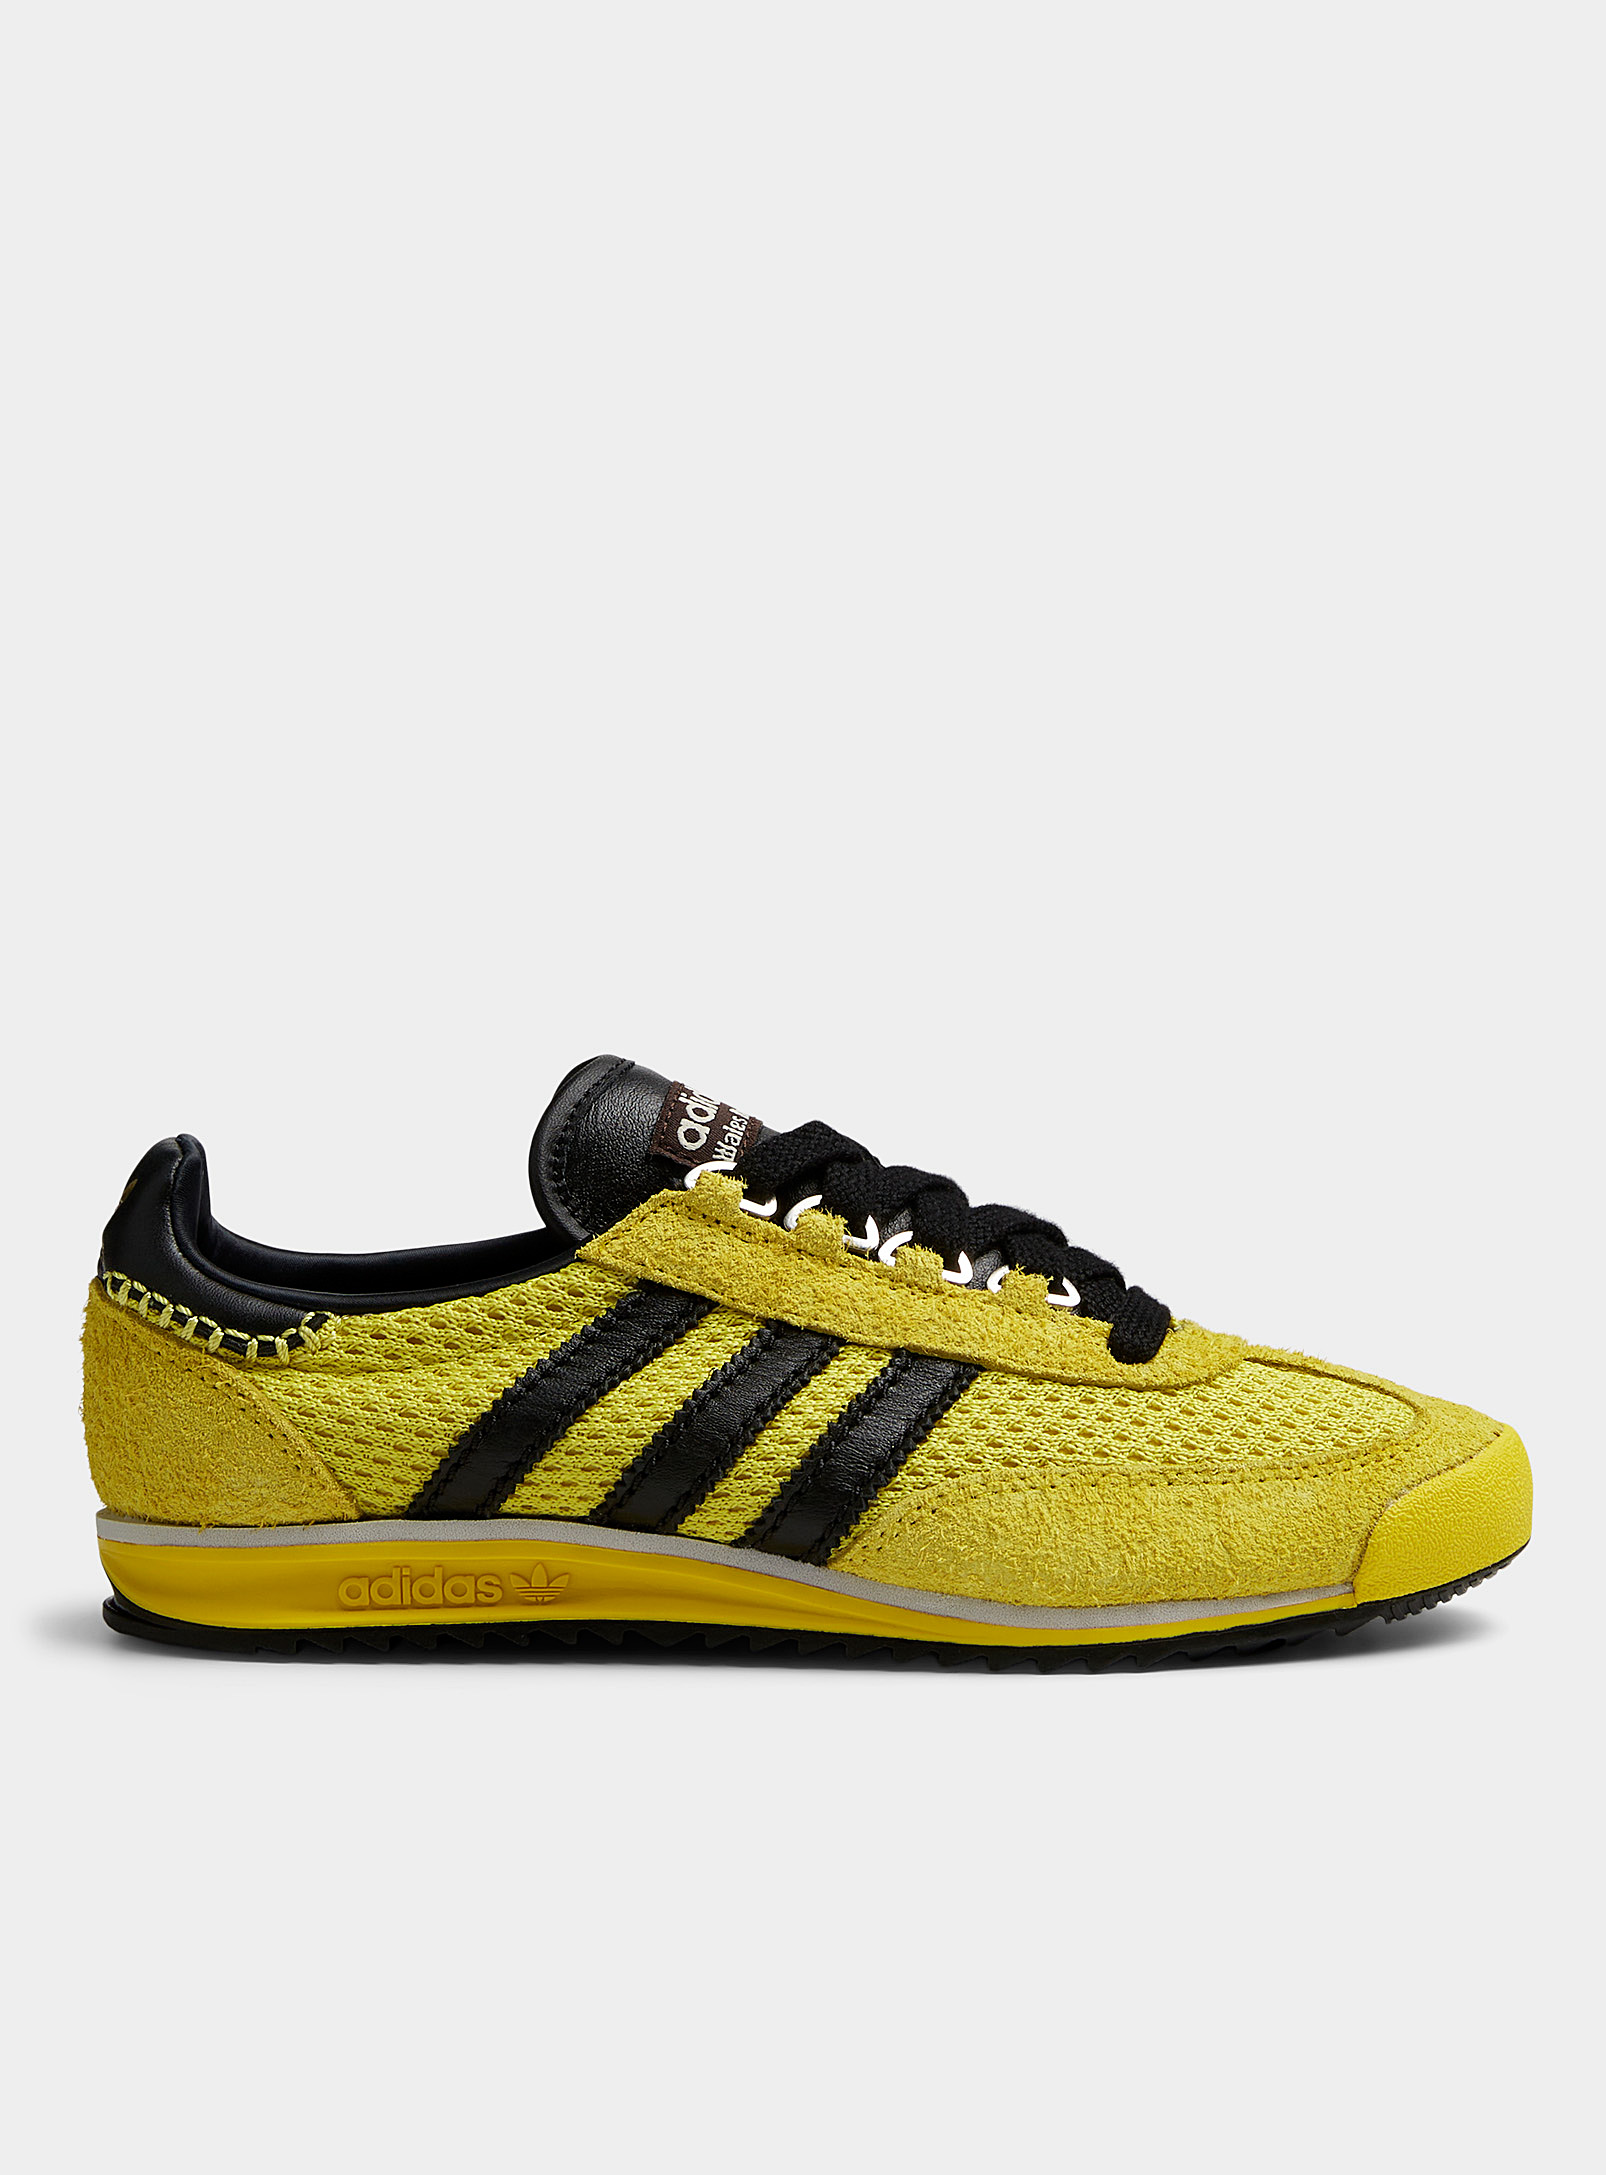 Shop Adidas X Wales Bonner Sunny Yellow Sl76 Sneakers Unisex In Golden Yellow